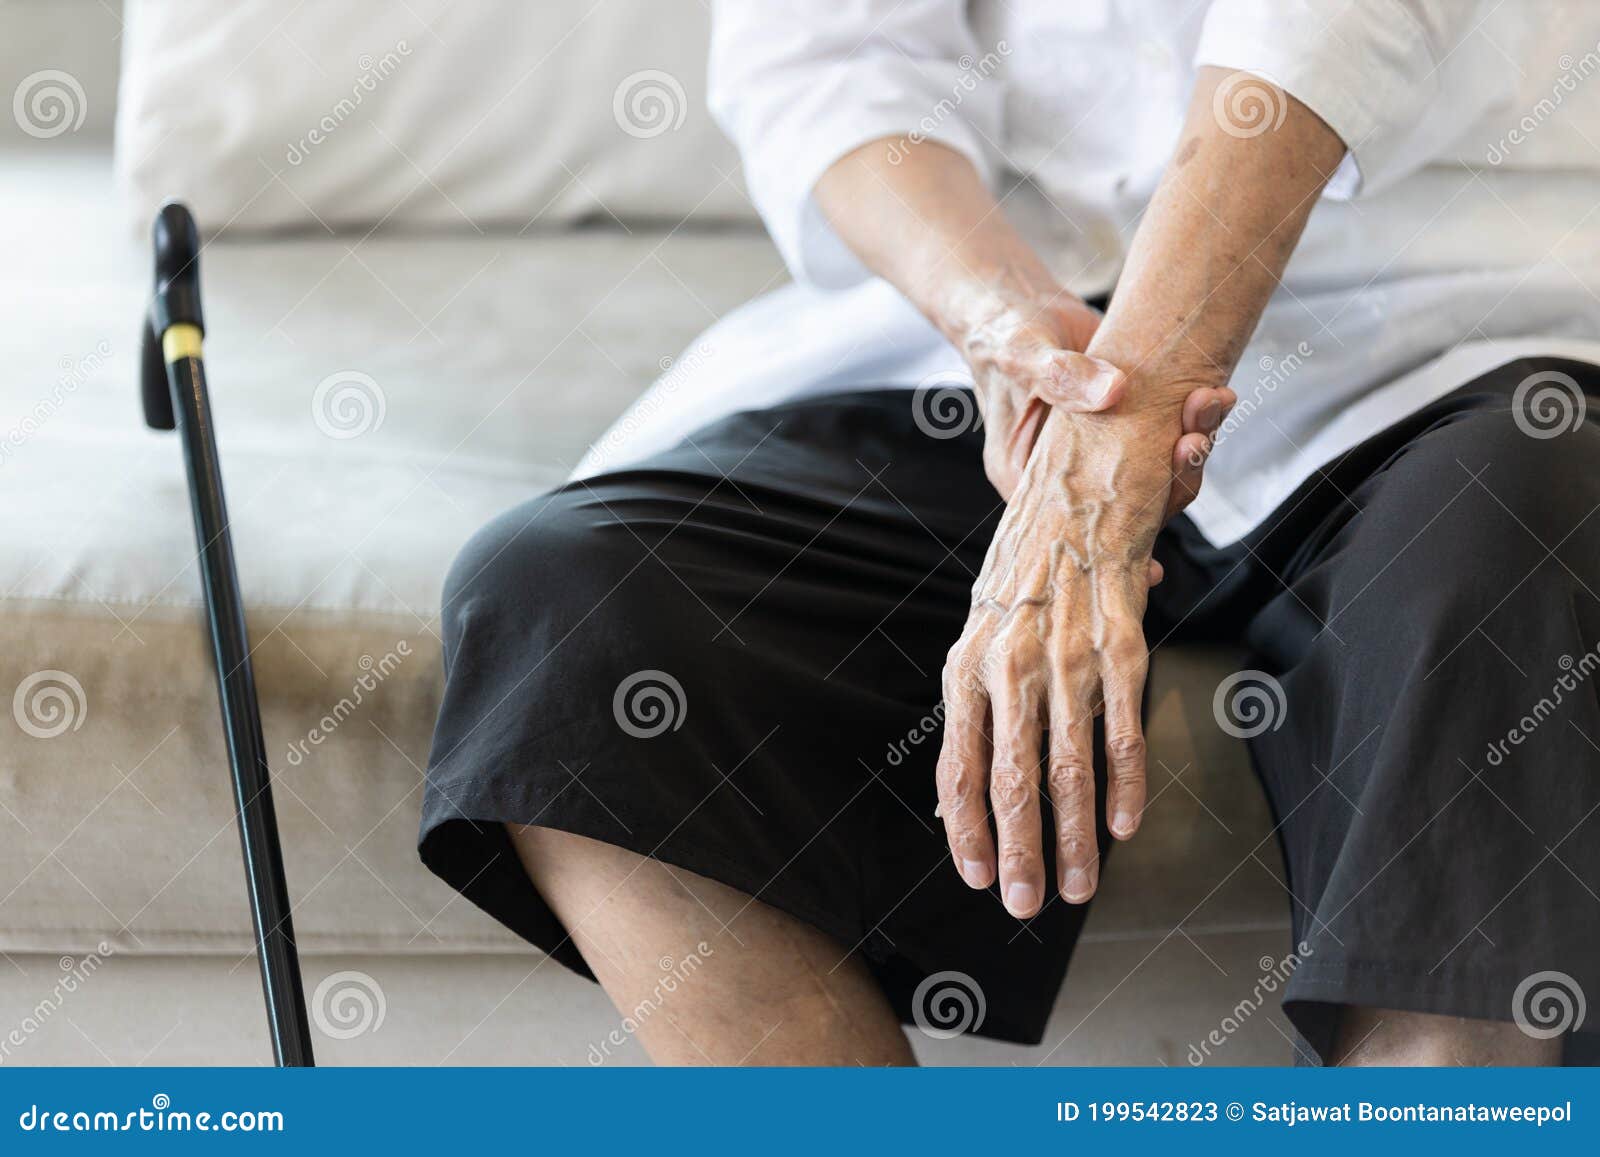 close up view on the shaking hand of the senior woman,symptom of resting tremor or parkinson`s disease,old elderly patient holdin